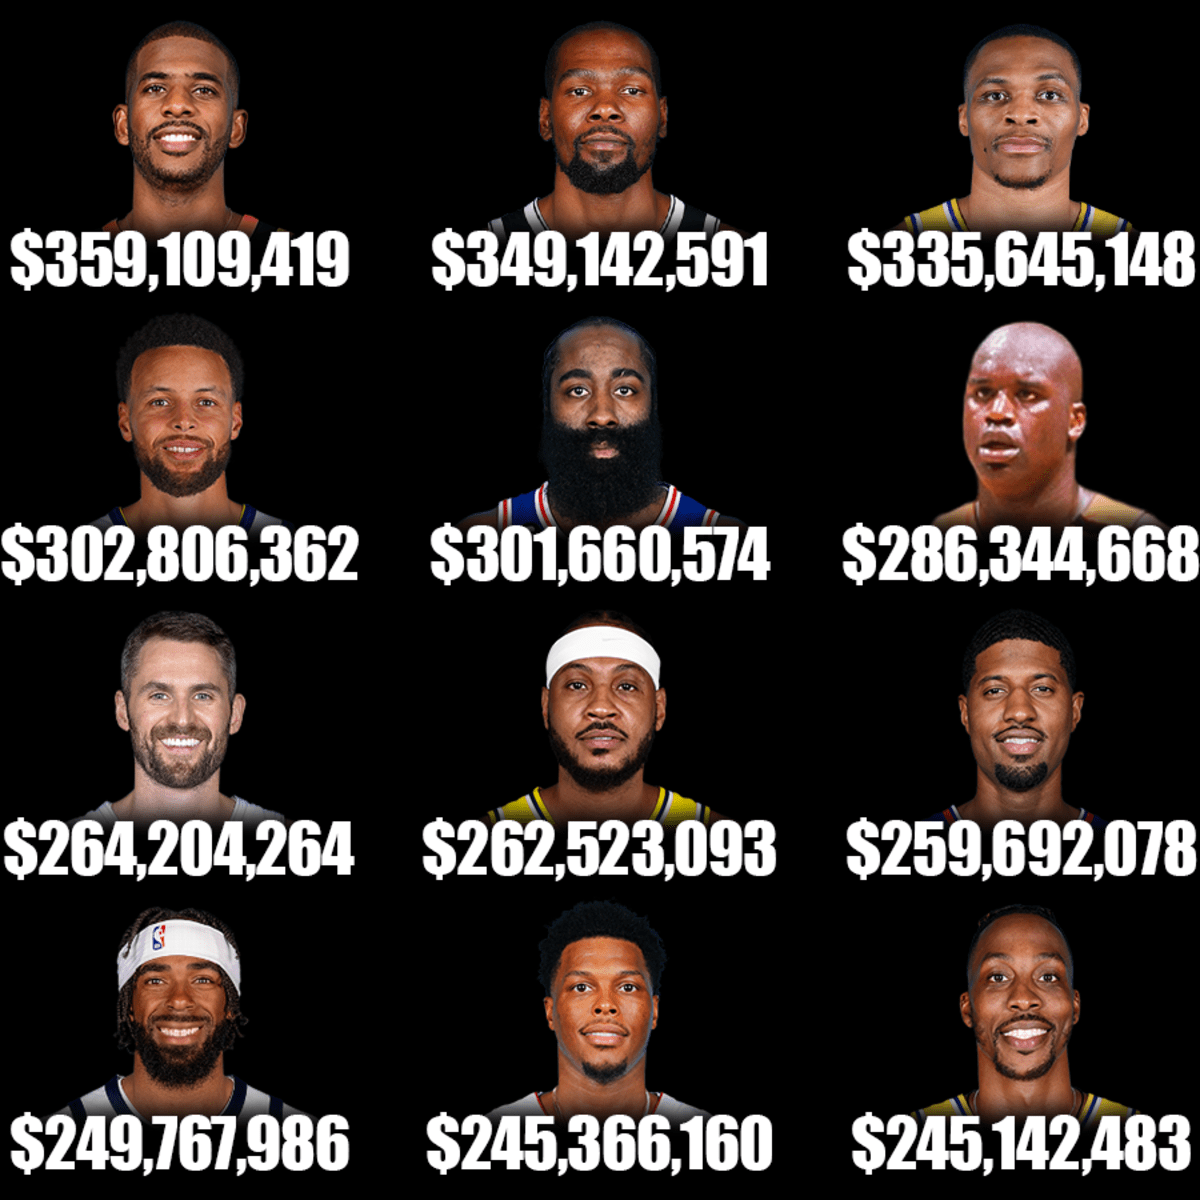 Top 15 Highest Paid NBA Players of All Time 